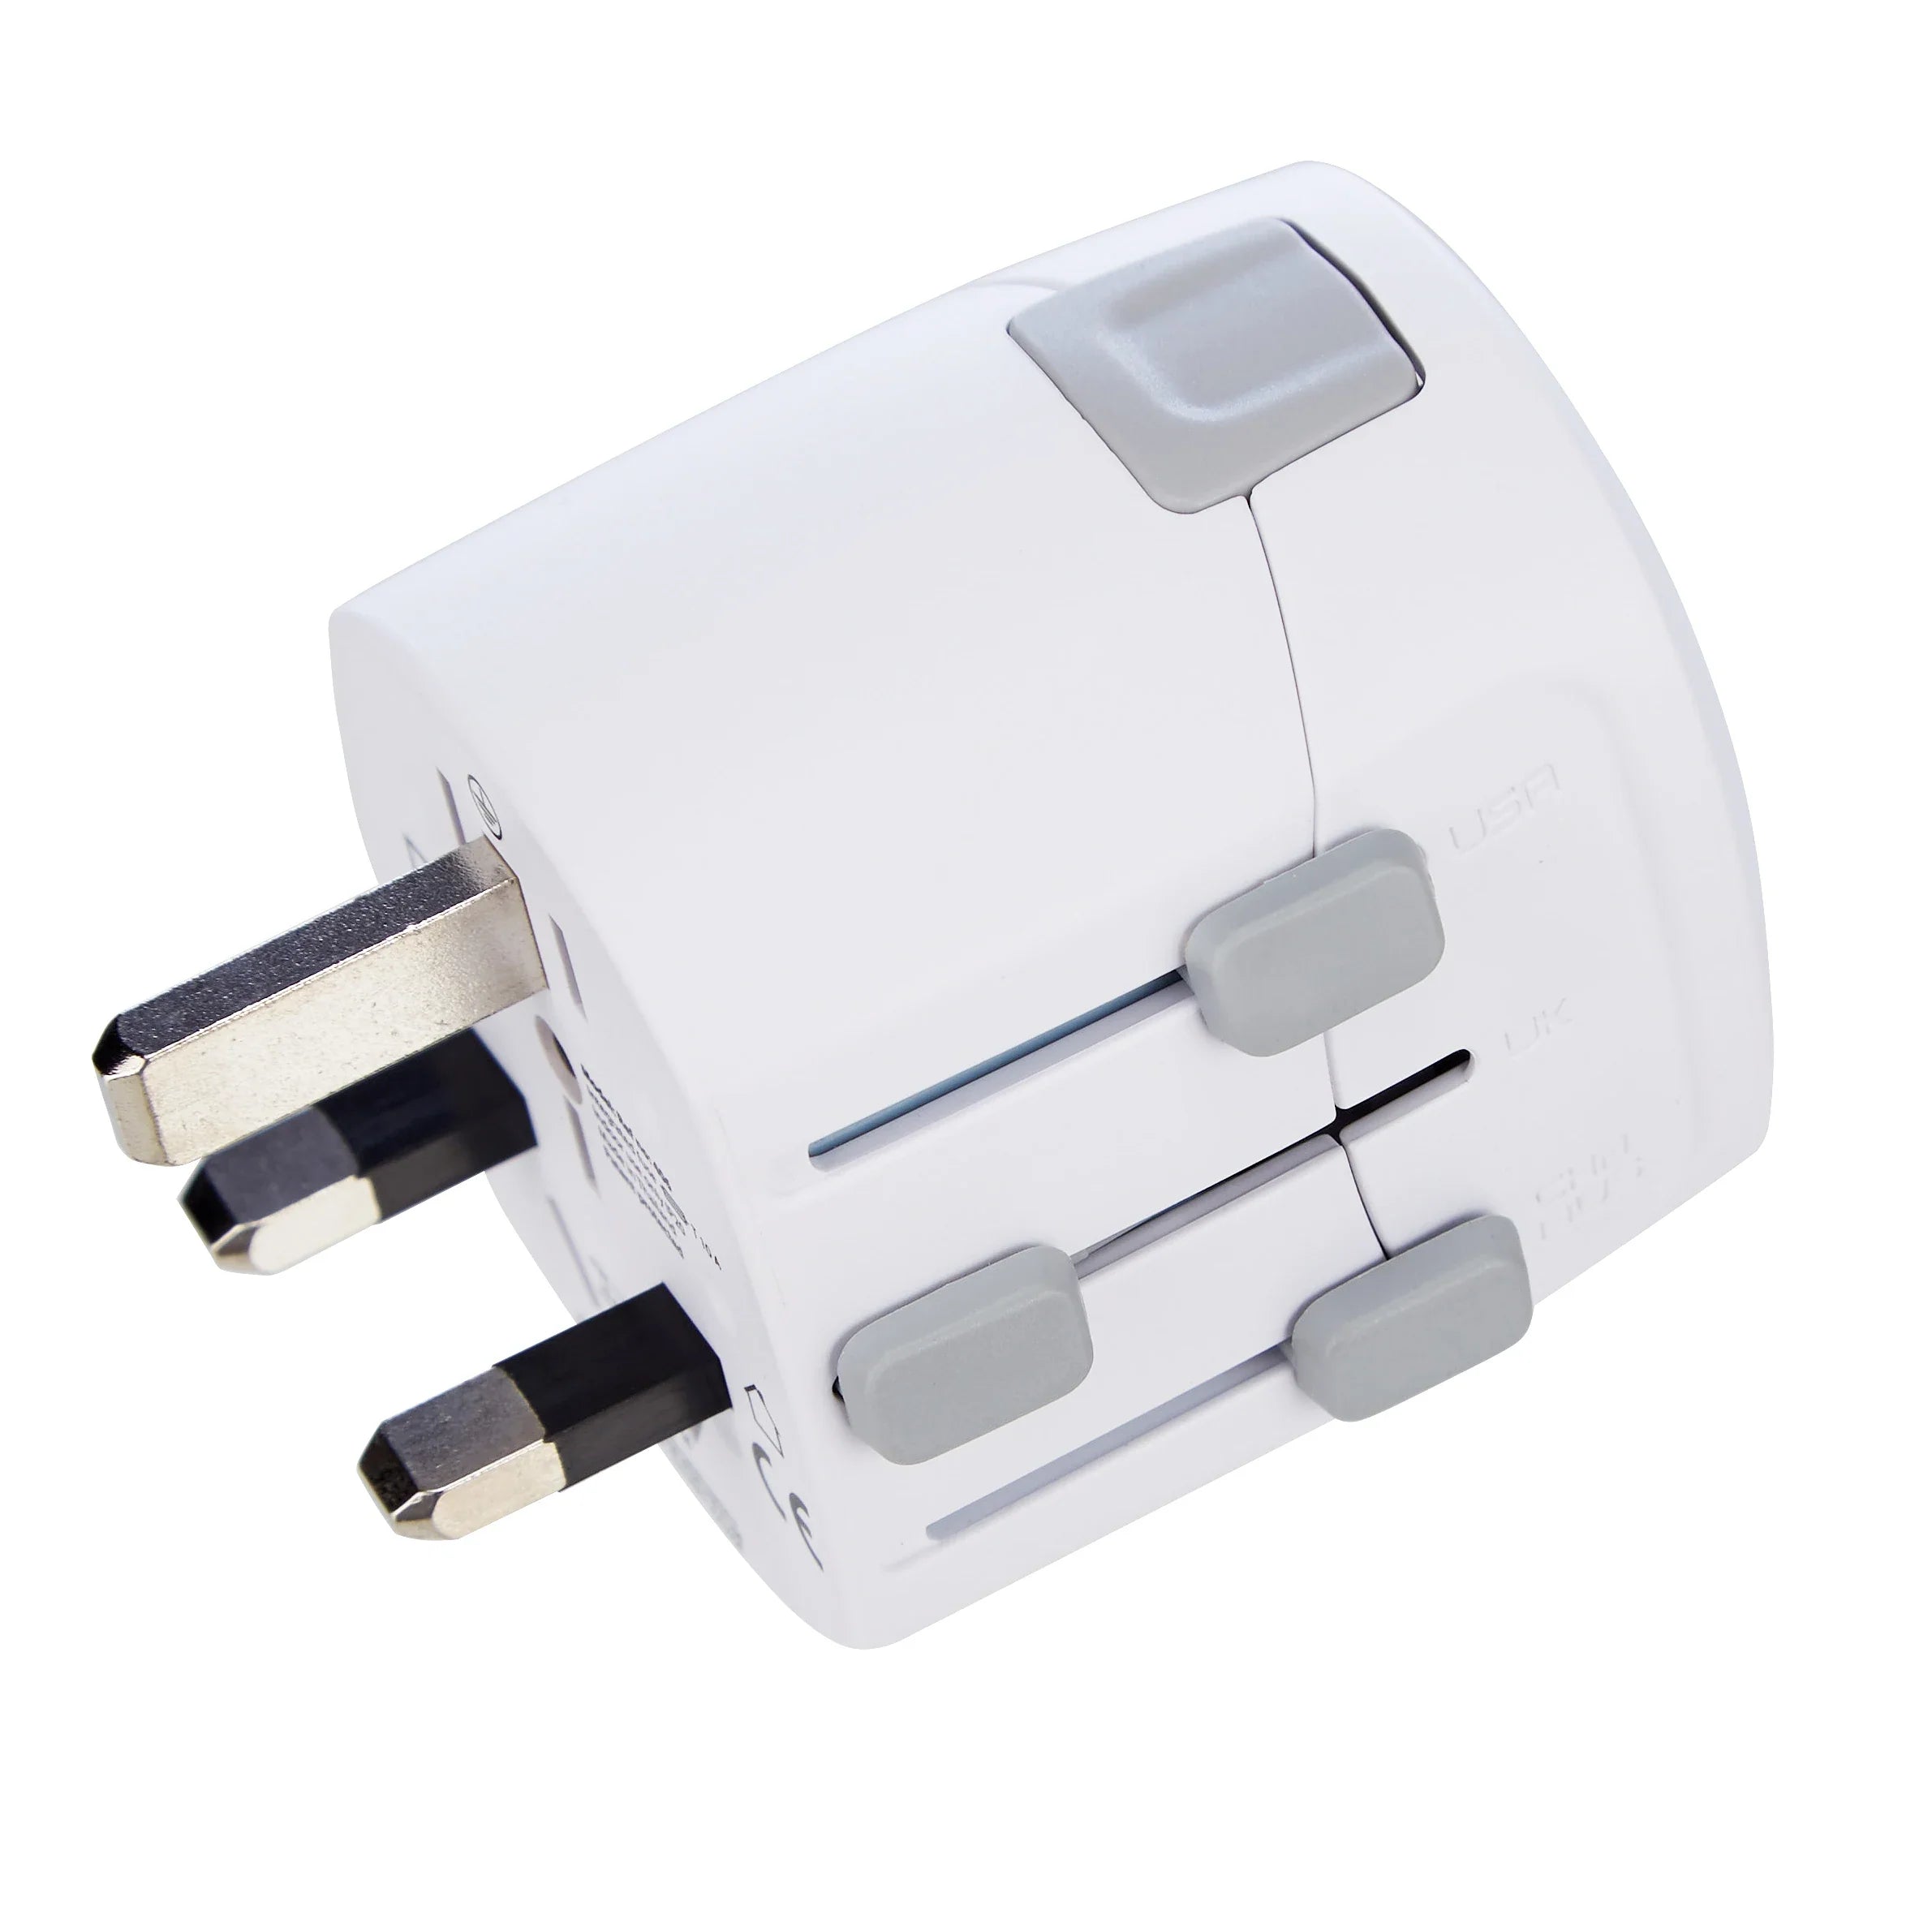 Design Go travel accessories Earthed universal adapter - white